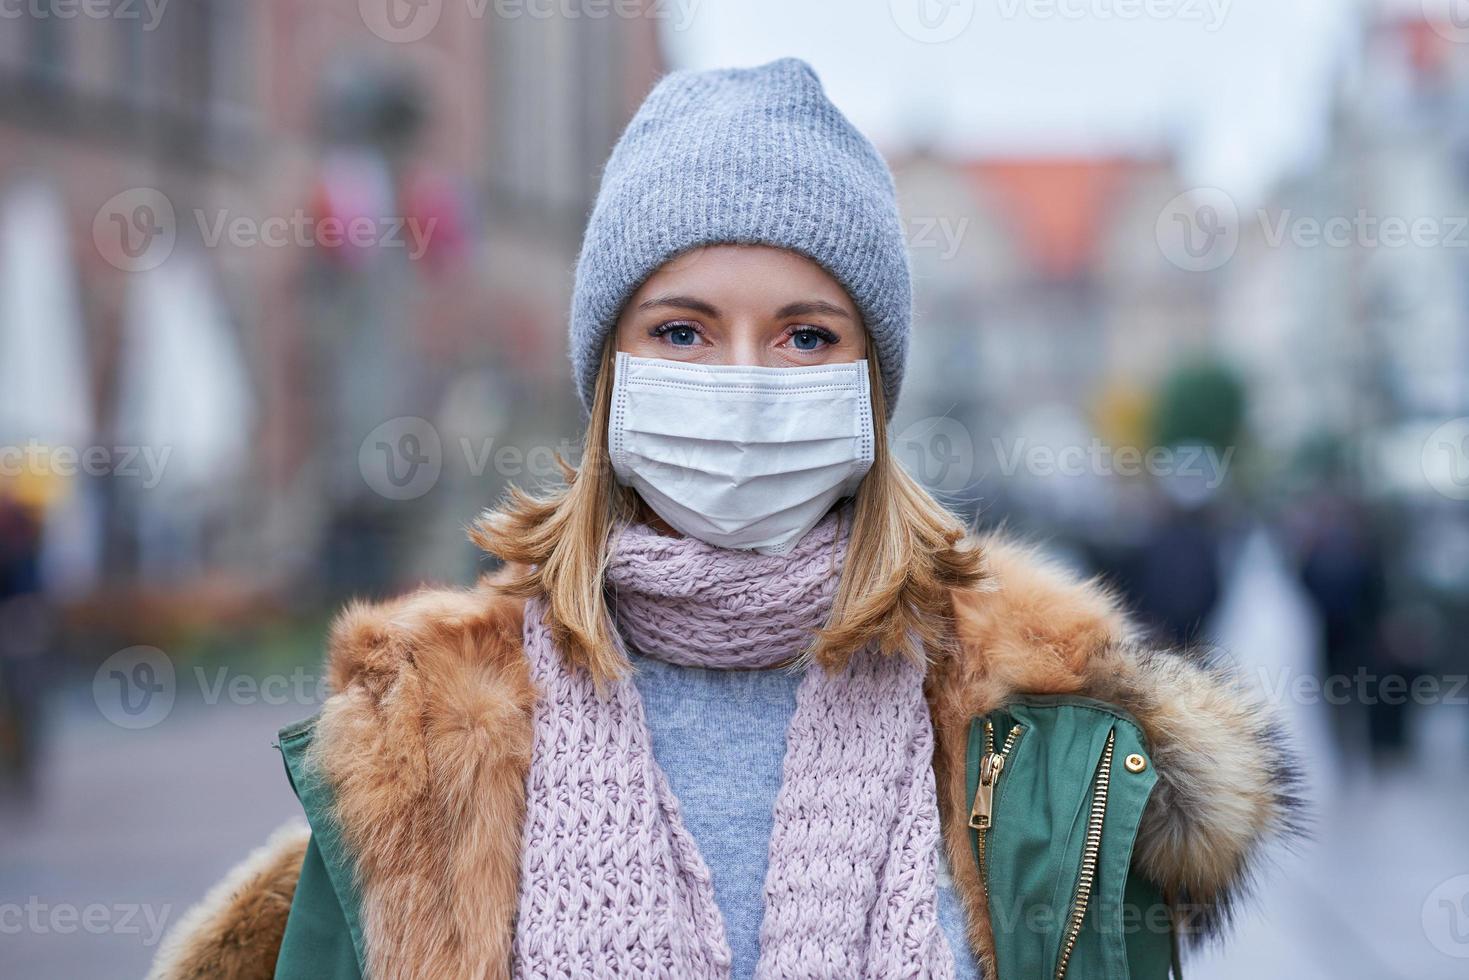 Woman wearing face mask because of Air pollution or virus epidemic in the city photo